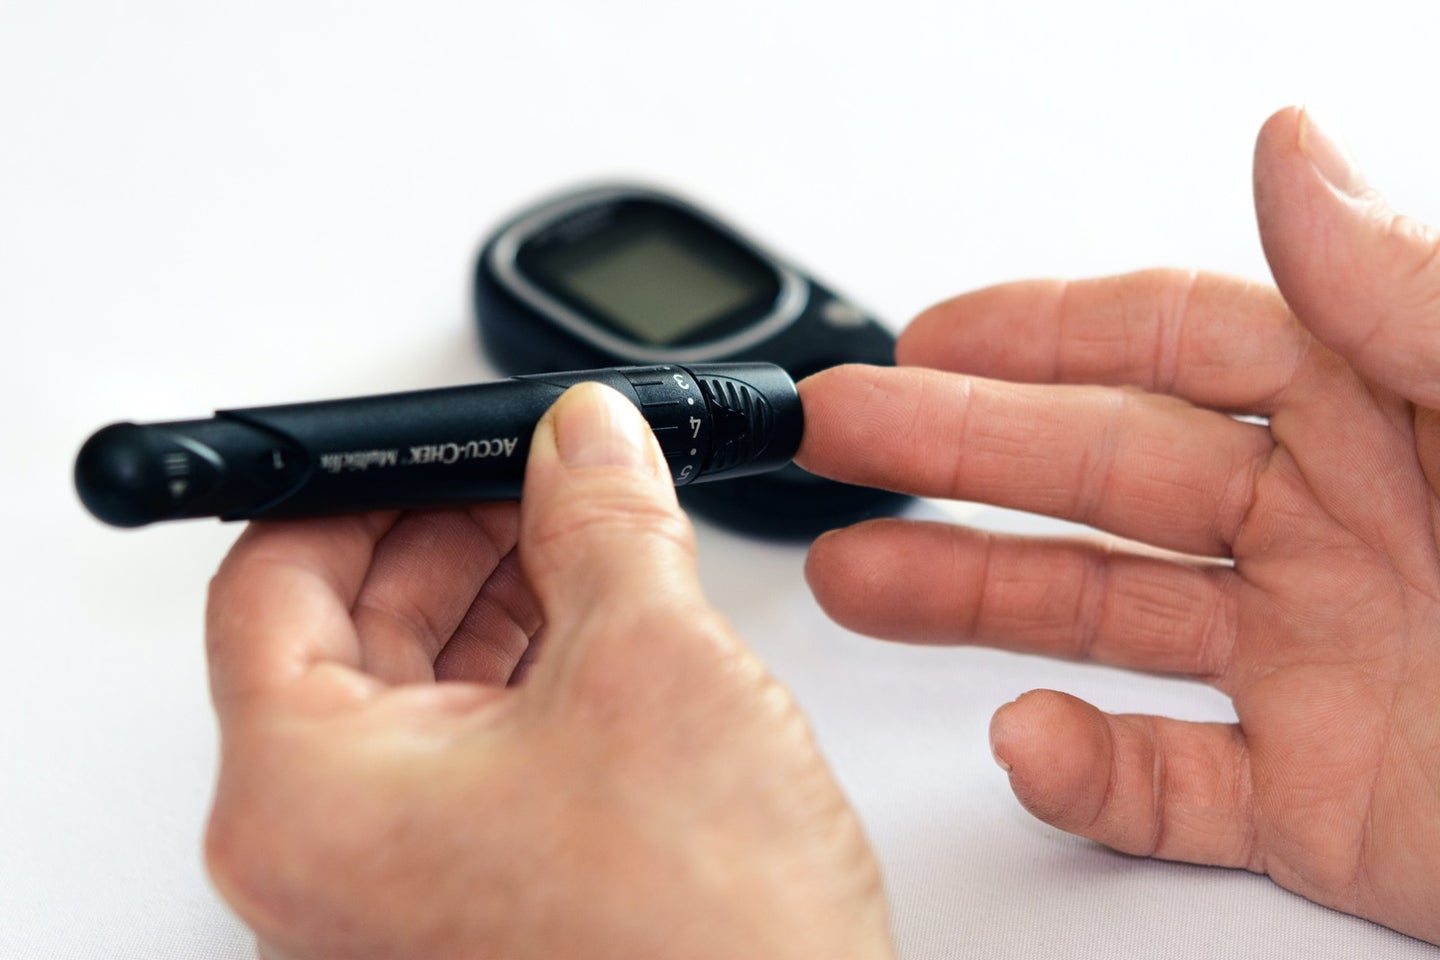 a person with diabetes uses a lancet to poke their finger to check blood sugar levels